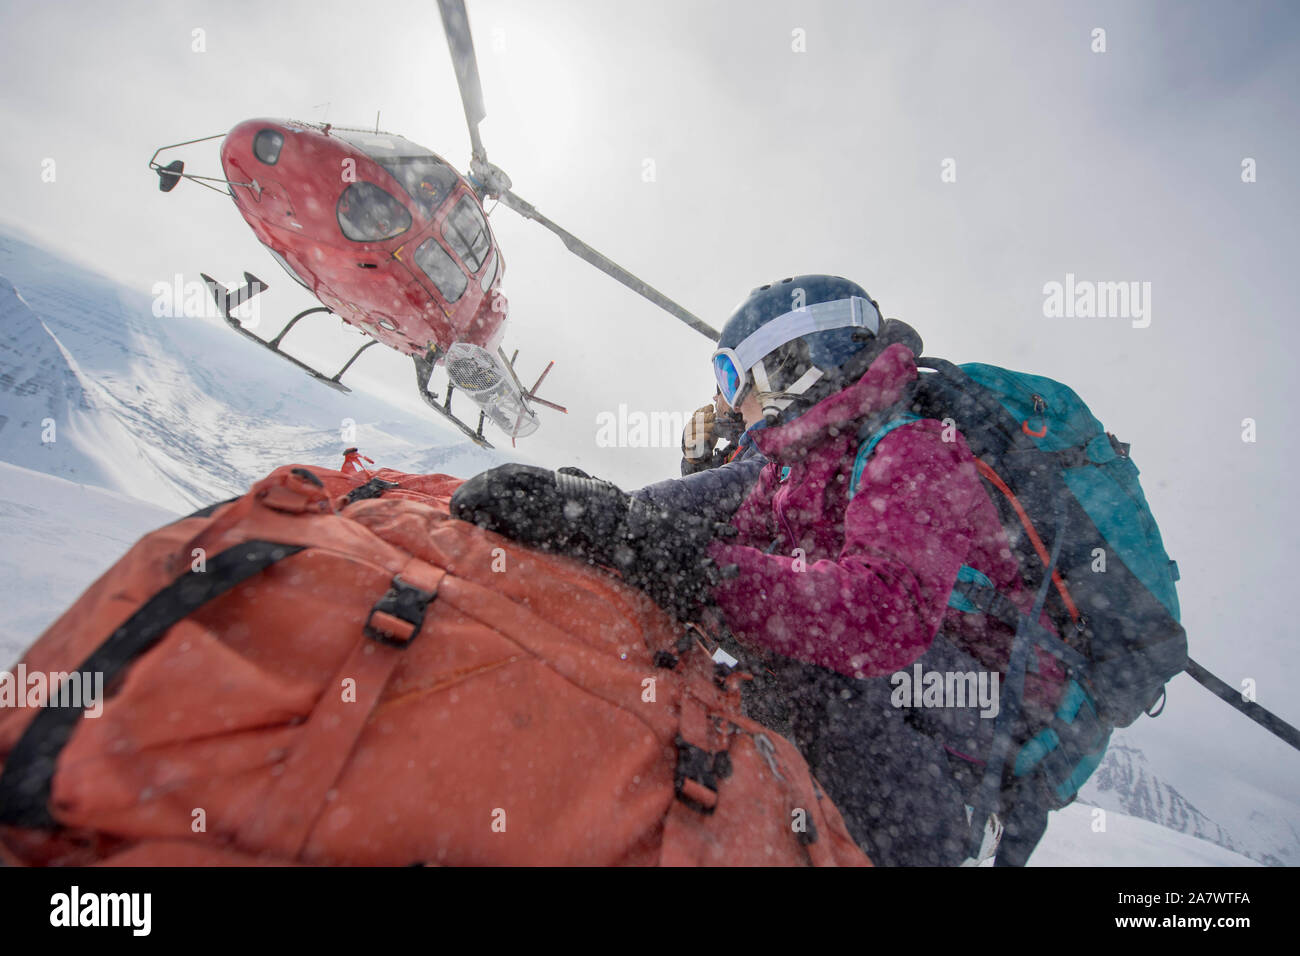 A female skier being dropped off by a helicopter. Stock Photo